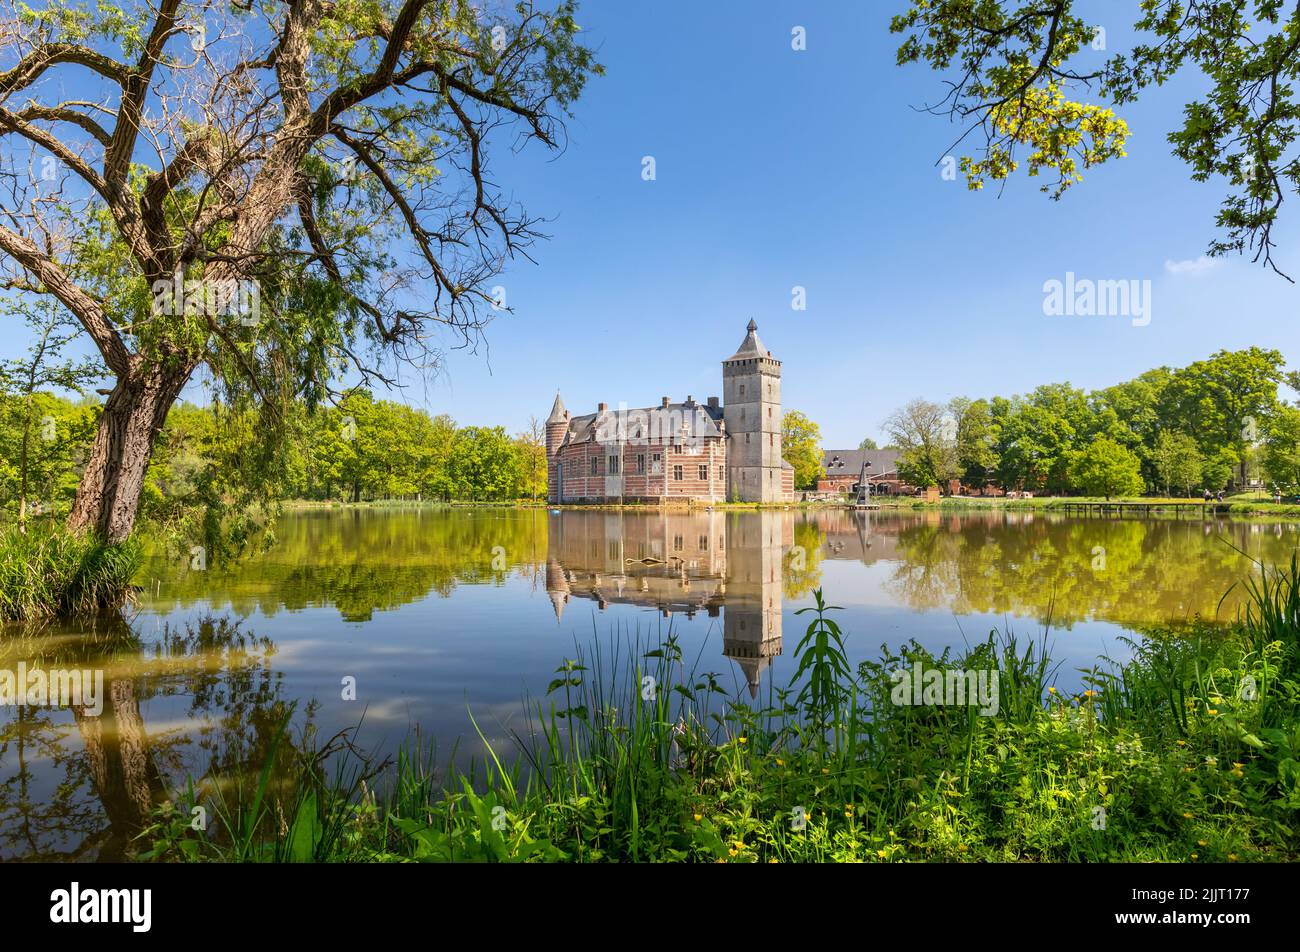 Holsbeek, Belgium - May 06 2022: View of historic Castle Van Horst with lake and park in summer day Stock Photo